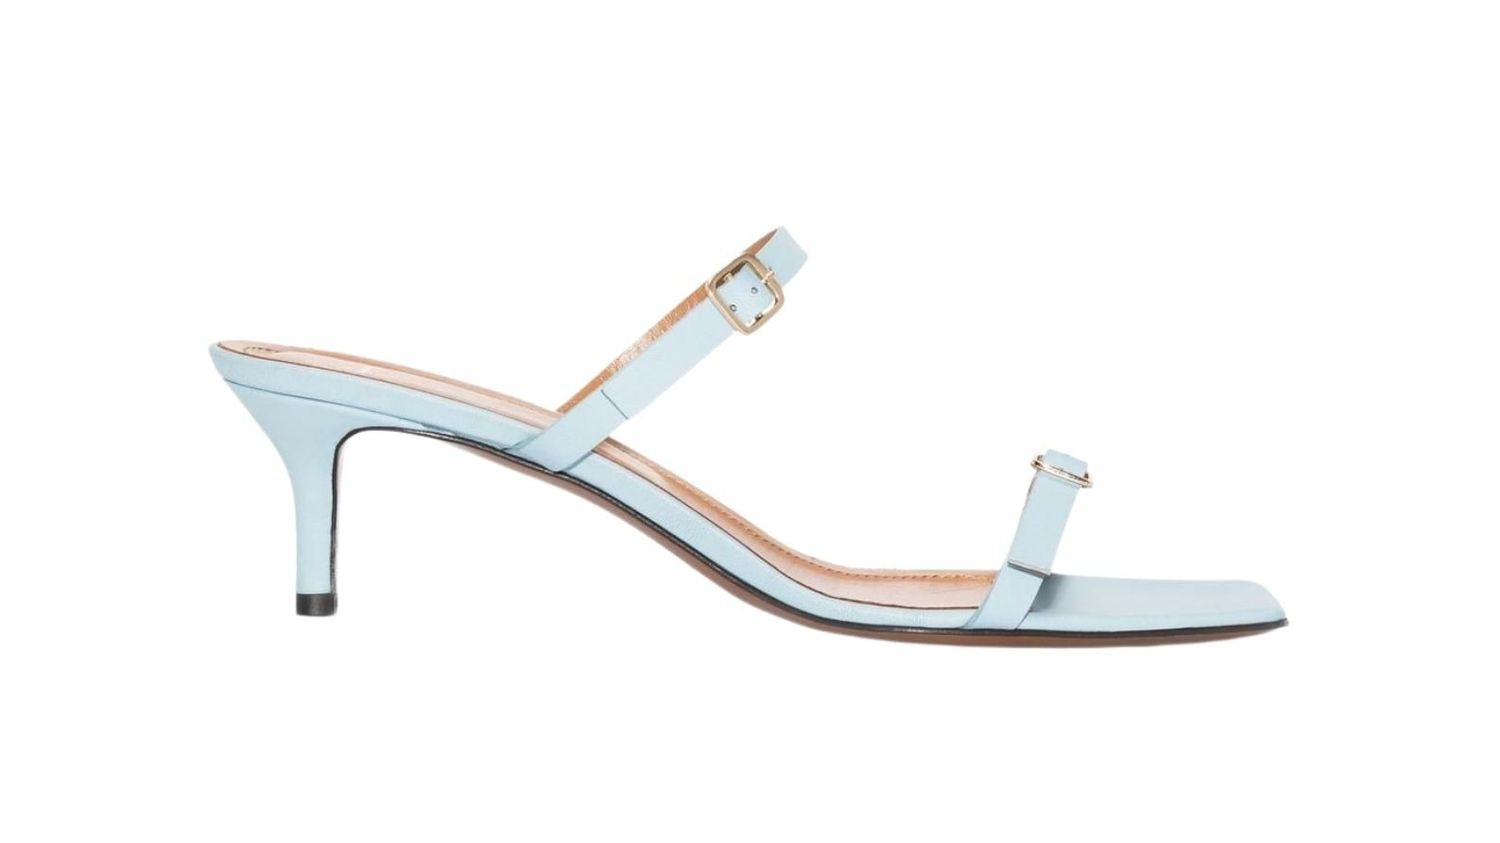 These are the heels guaranteed to take you painlessly through the night ...